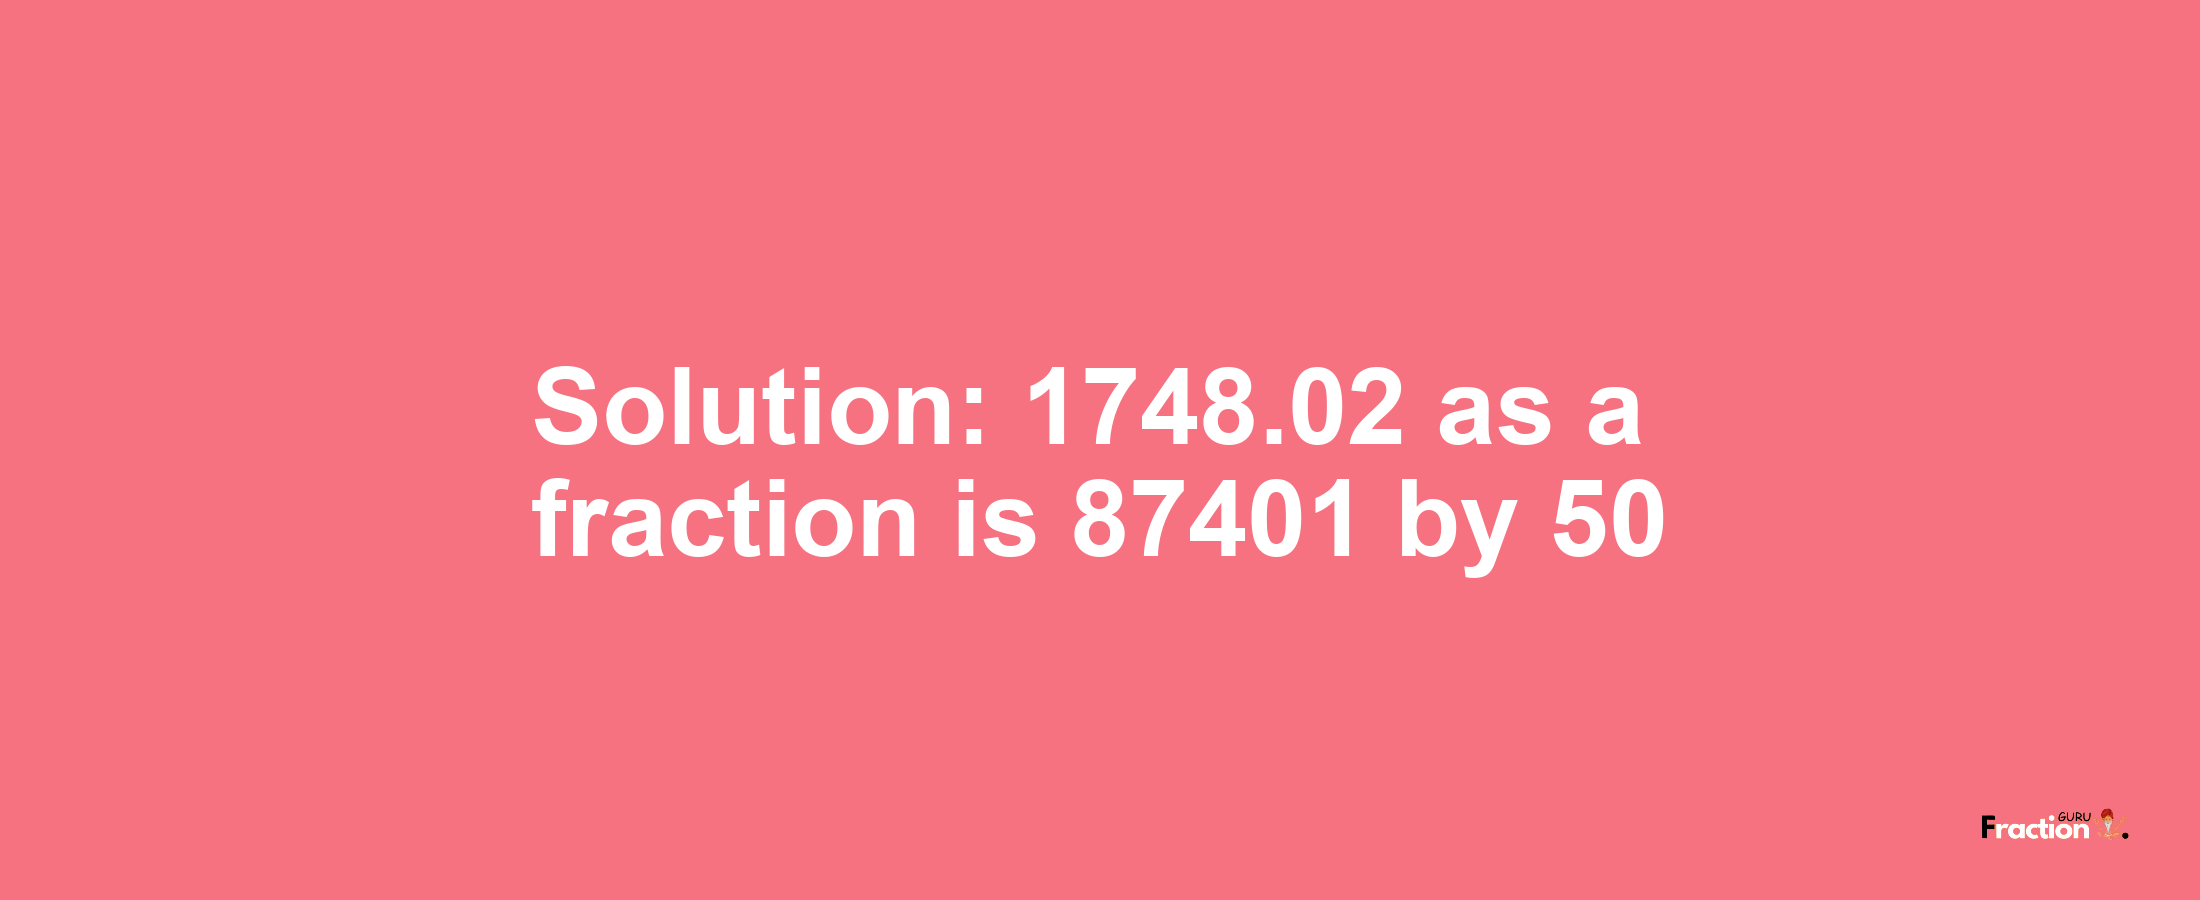 Solution:1748.02 as a fraction is 87401/50